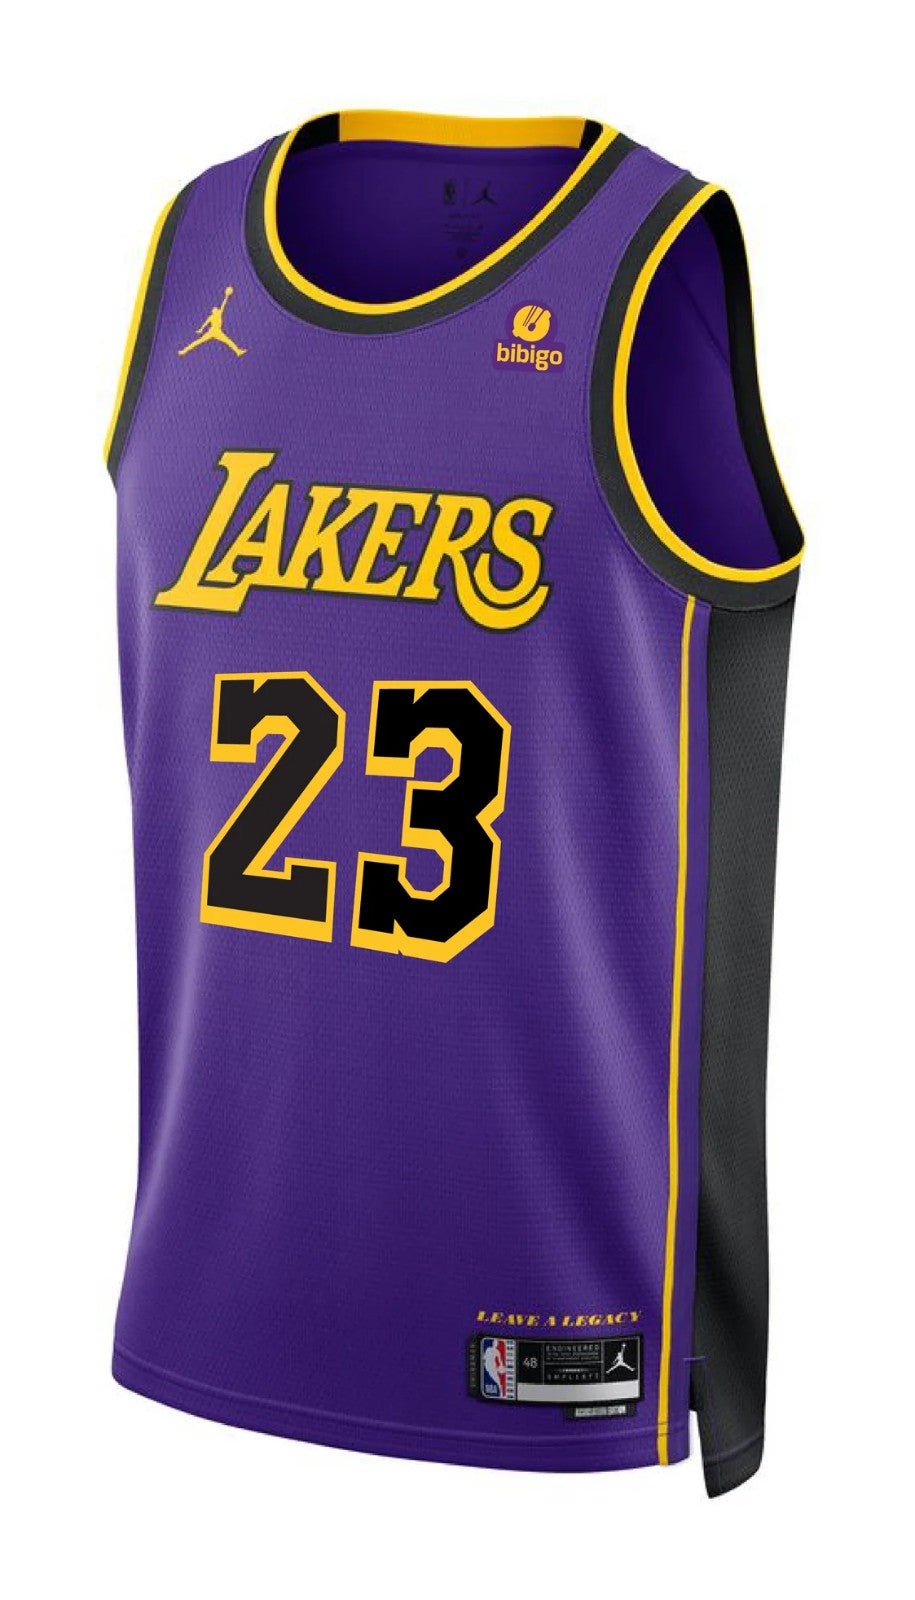 LOS ANGELES LAKERS STATEMENT JERSEY 23/24